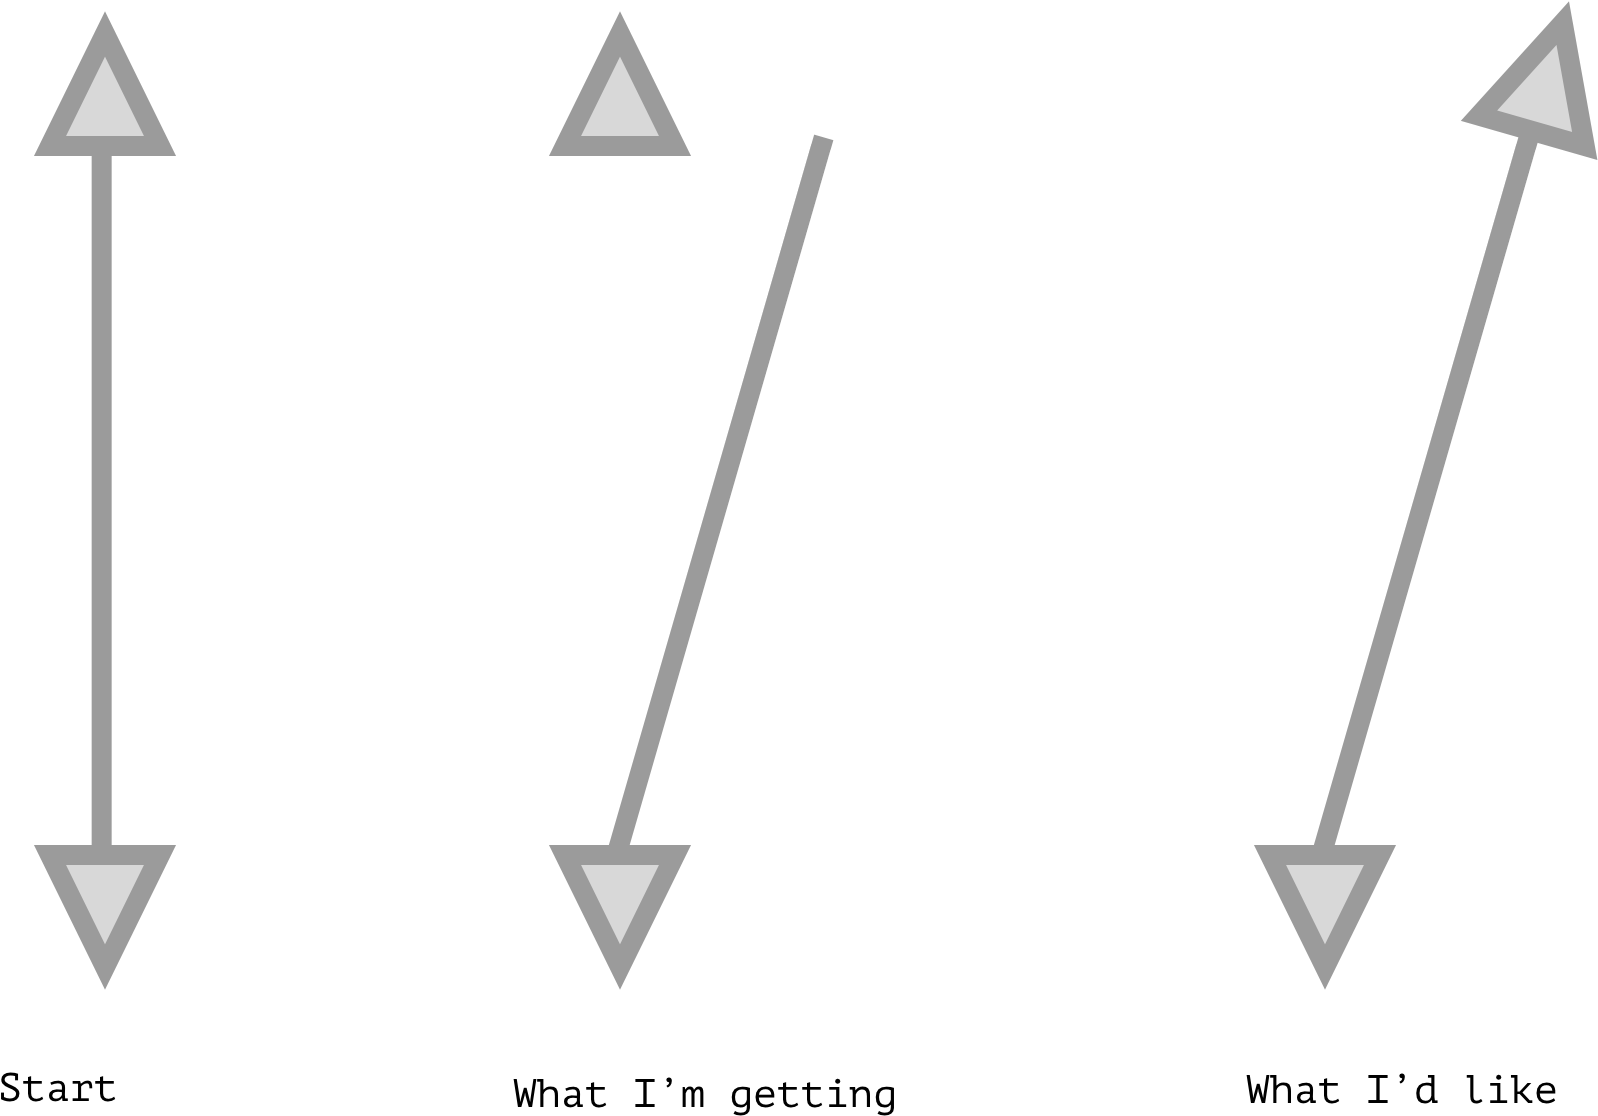 A Black Background With Arrows Pointing Upwards